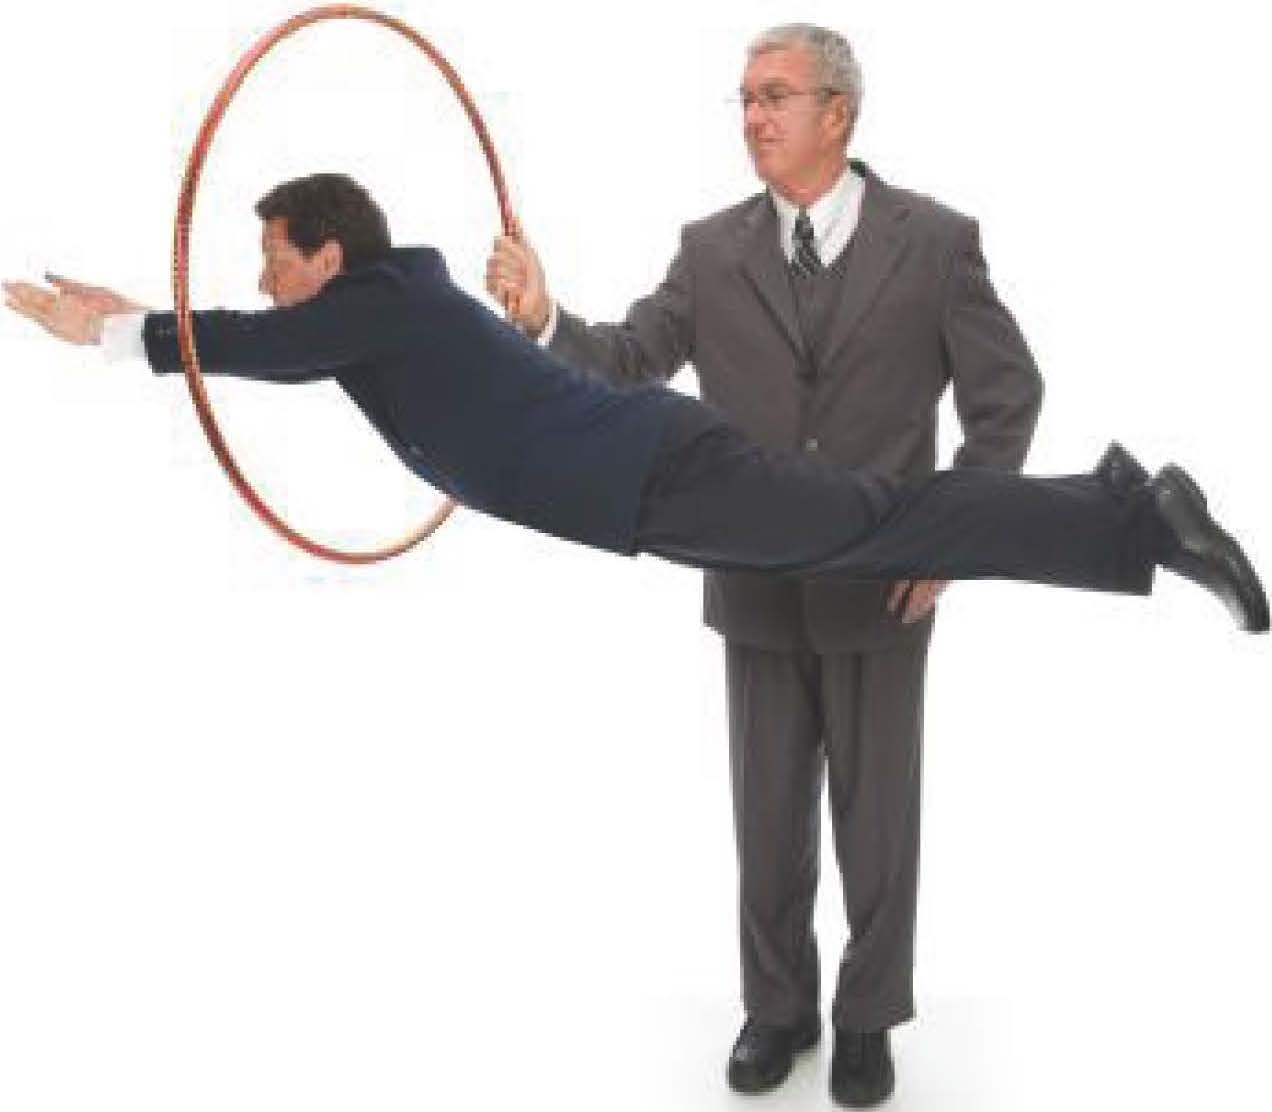 CEO holding up a hoop for his employee to jump through